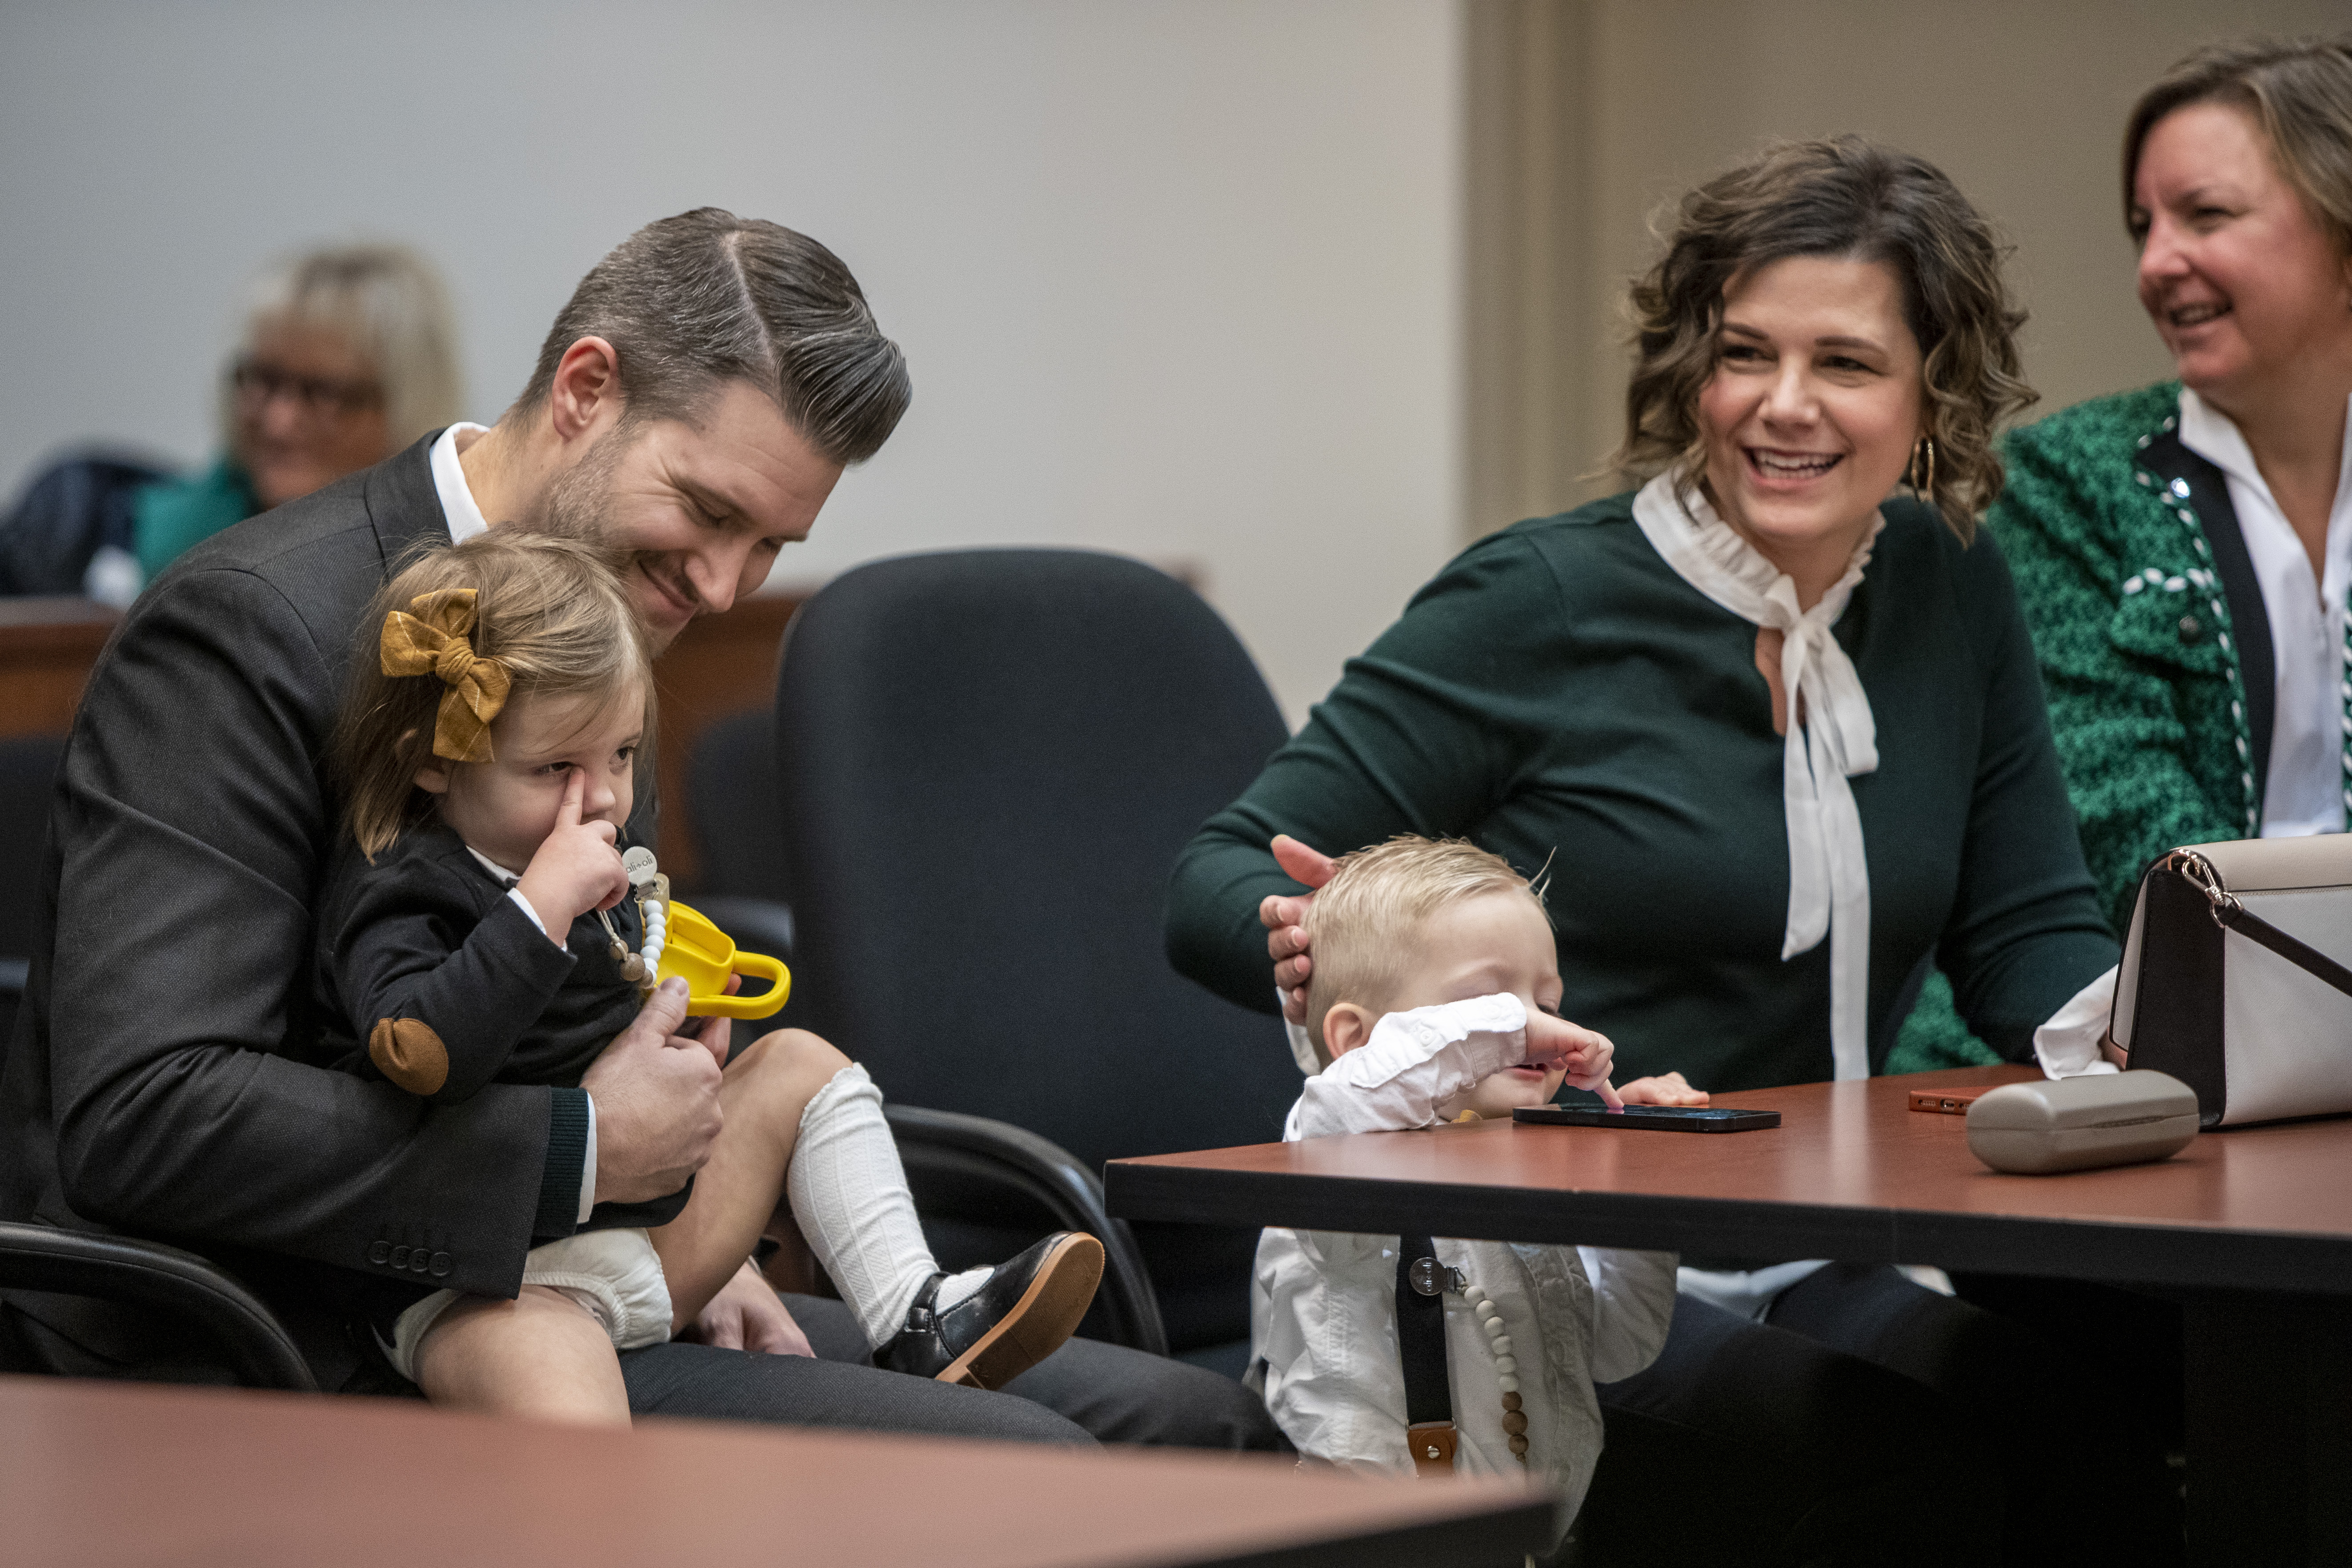 Tammy and Jordan Myers hold their twins, Ellison, left, and Eames, during Adoption Day at the Kent County Courthouse in Grand Rapids on Thursday, Dec. 8, 2022.  Tammy and Jordan are the biological parents of the 1-year-old twins. Lauren Vermilye, a surrogate, gave birth to the twins after Tammy went through breast cancer treatment and has no claim to the babies. The Myers family was able to adopt the twins after convincing the court system to grant them custody. (Cory Morse | MLive.com)